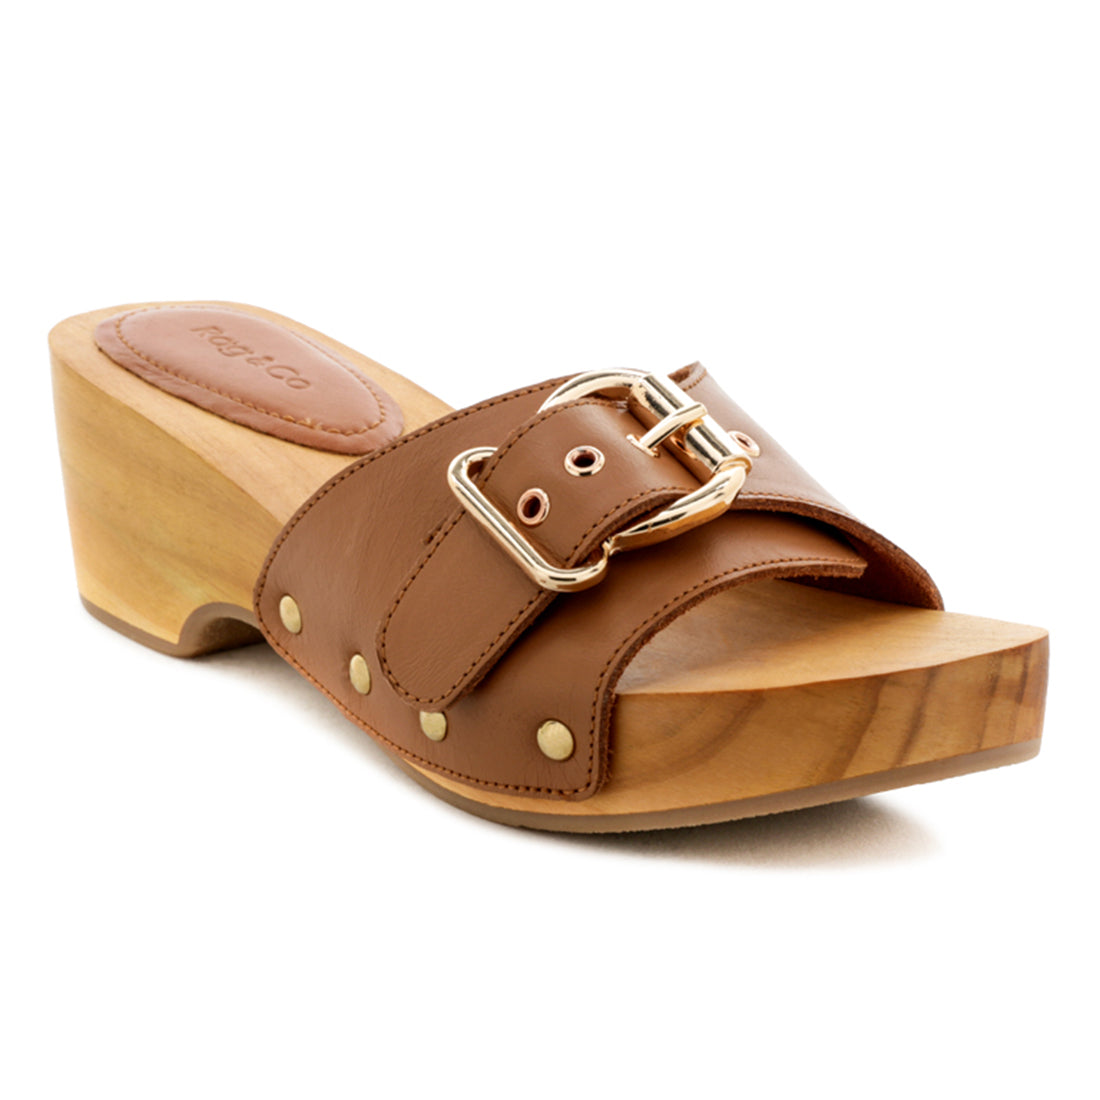 Studded Leather Wooden Clogs in Tan